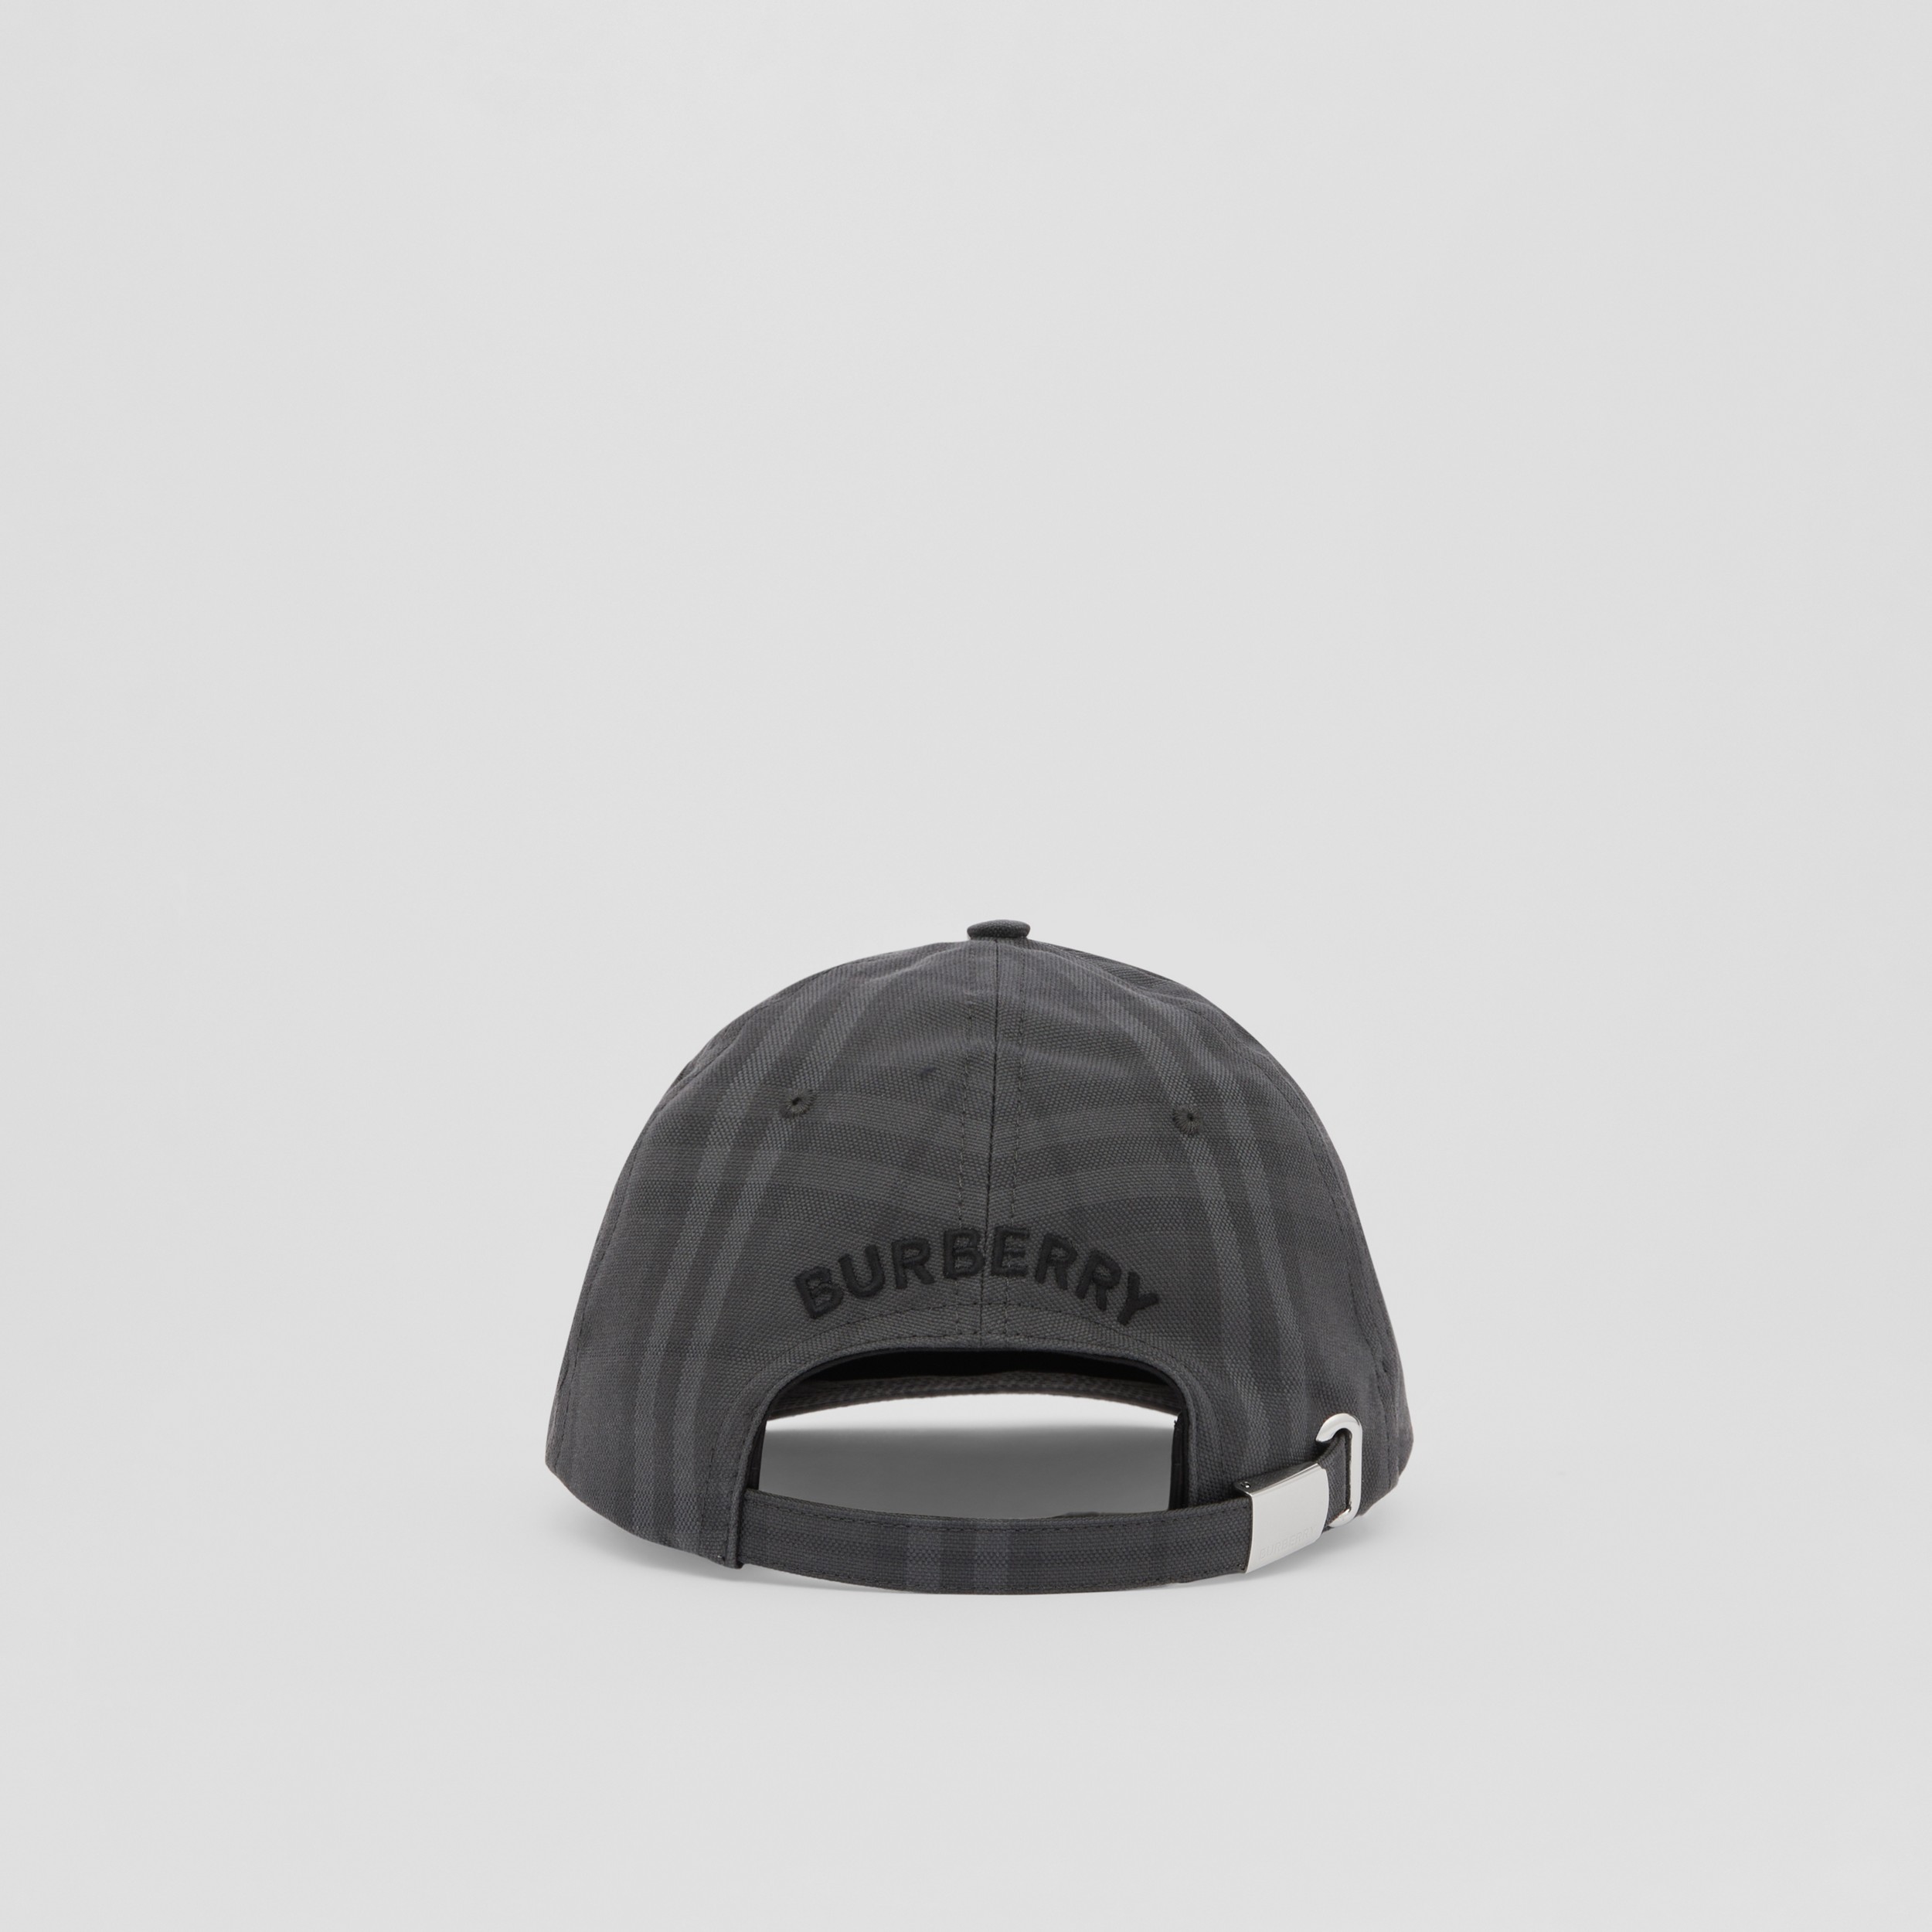 Grey Burberry Vintage Check Cotton Baseball Cap in Charcoal Check Womens Mens Accessories Mens Hats 